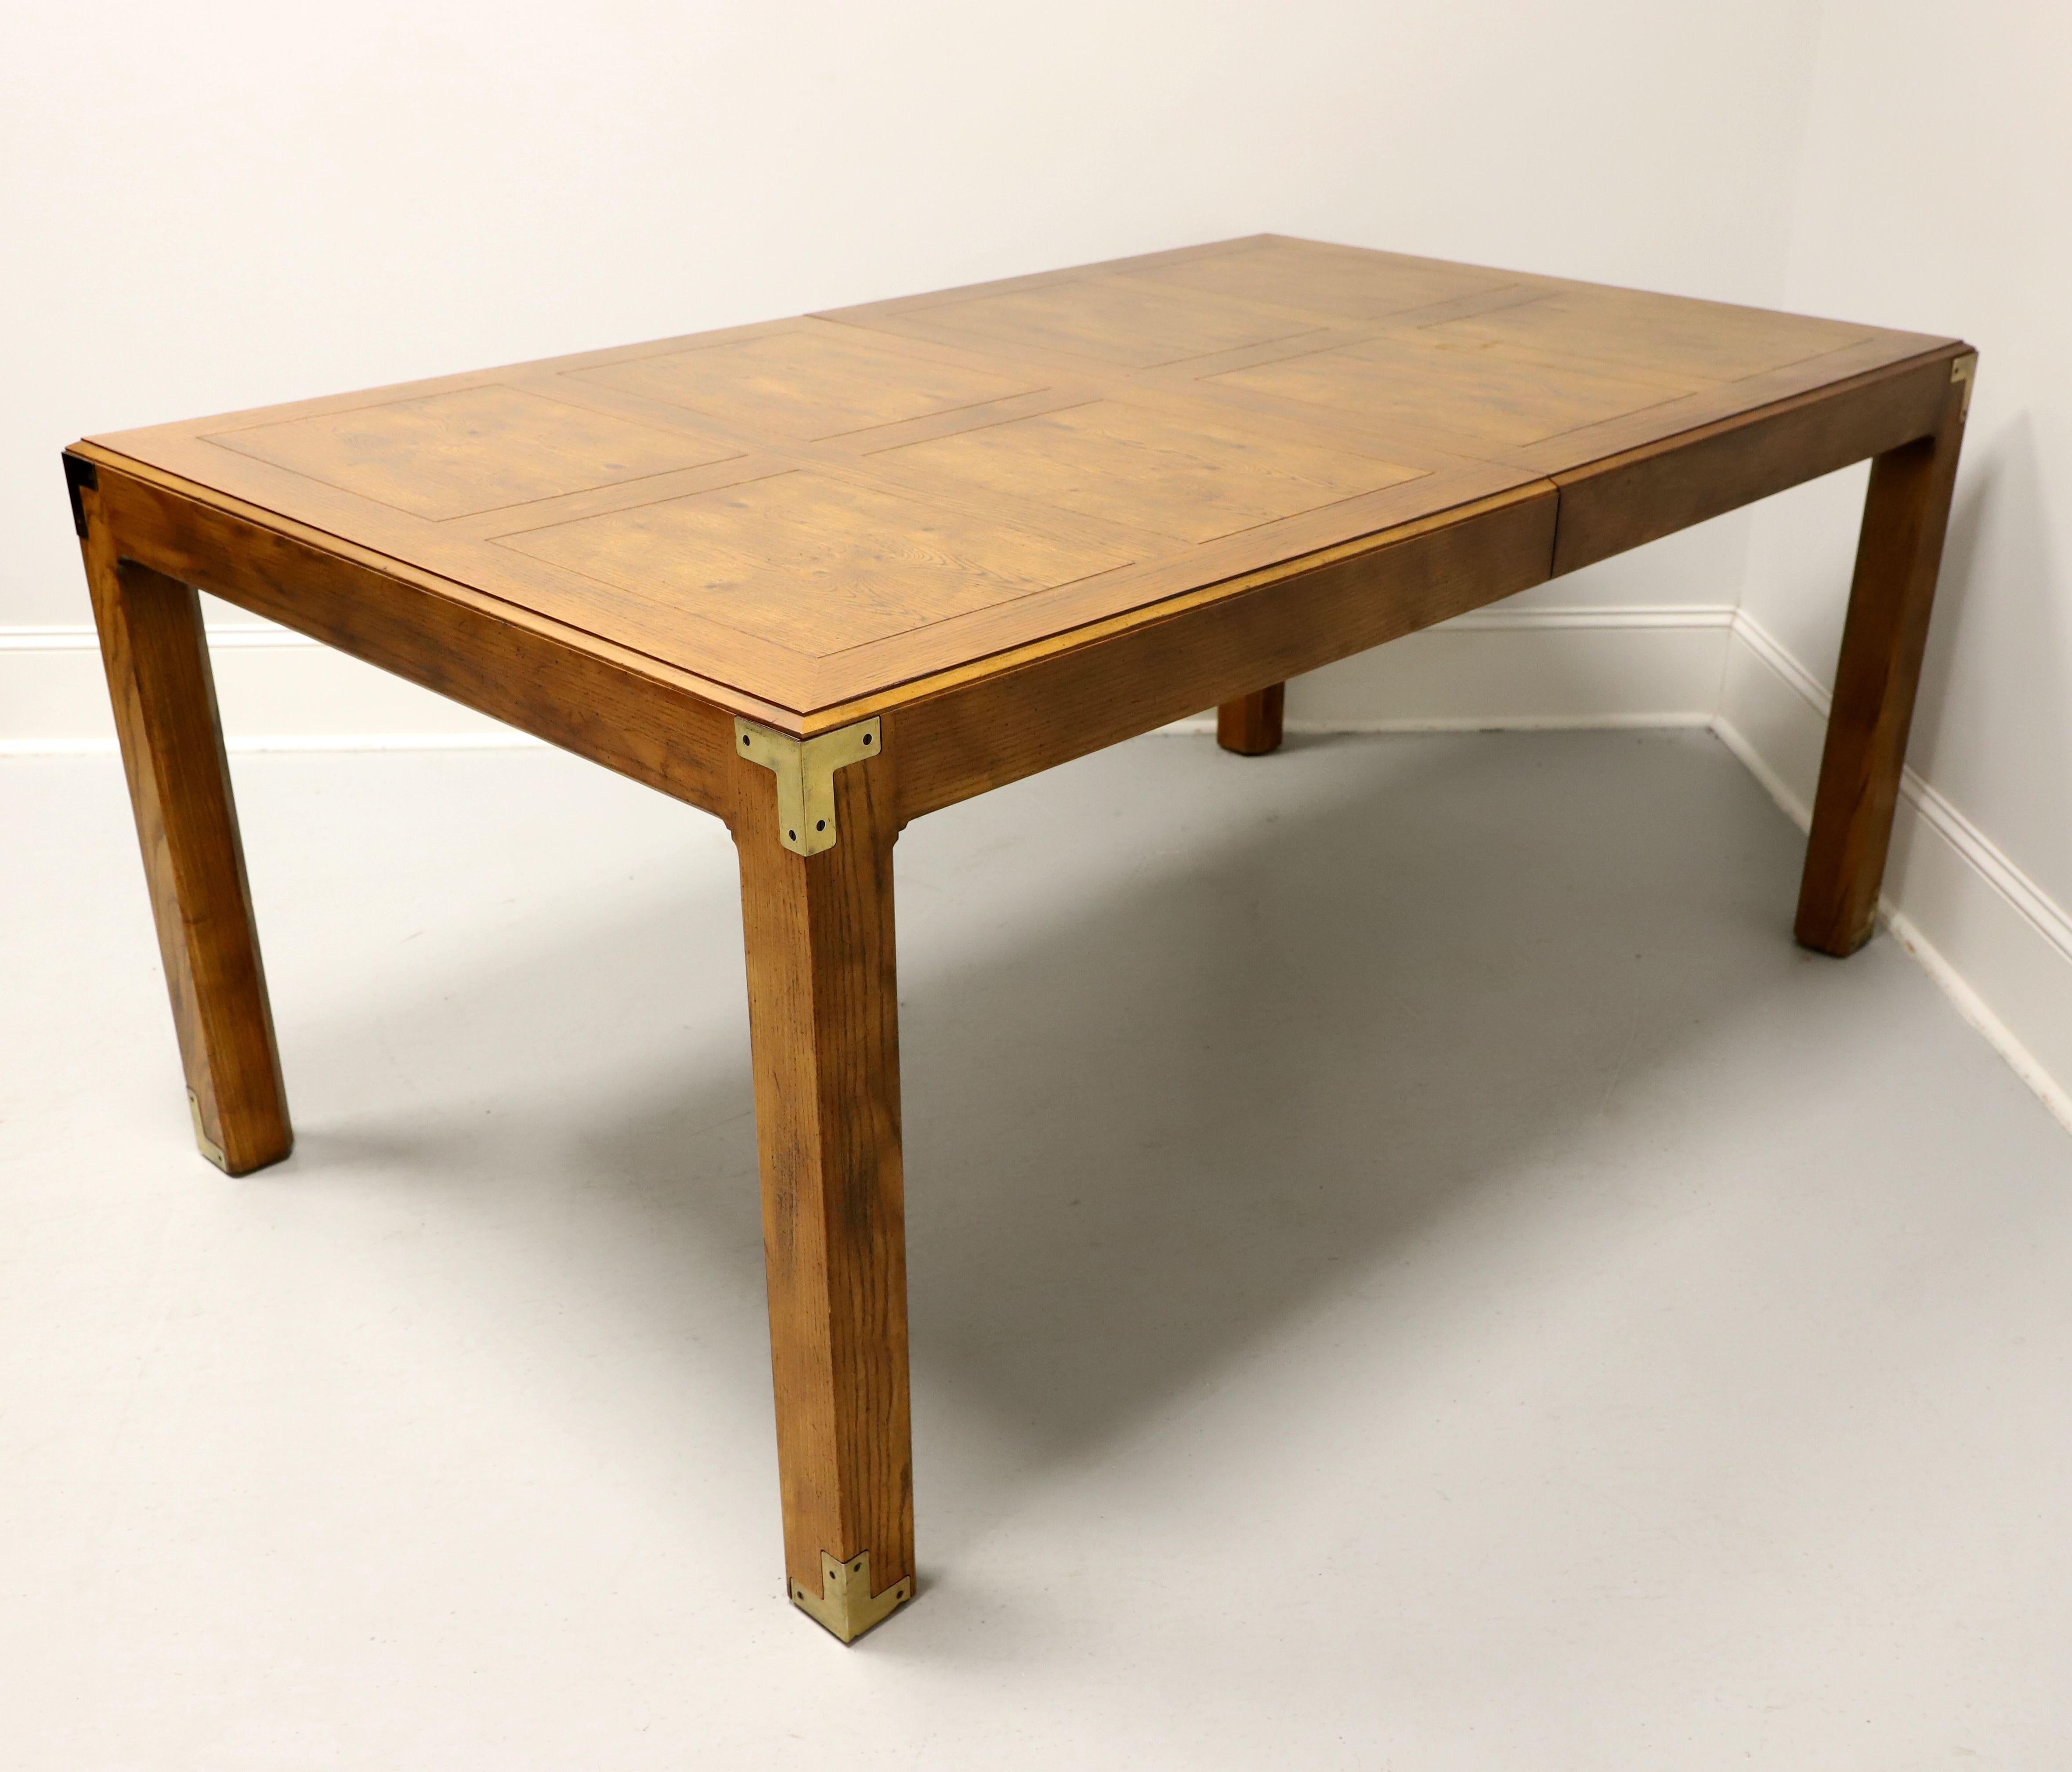 American HENREDON Artefacts Knotty Oak Rectangular Campaign Style Dining Table